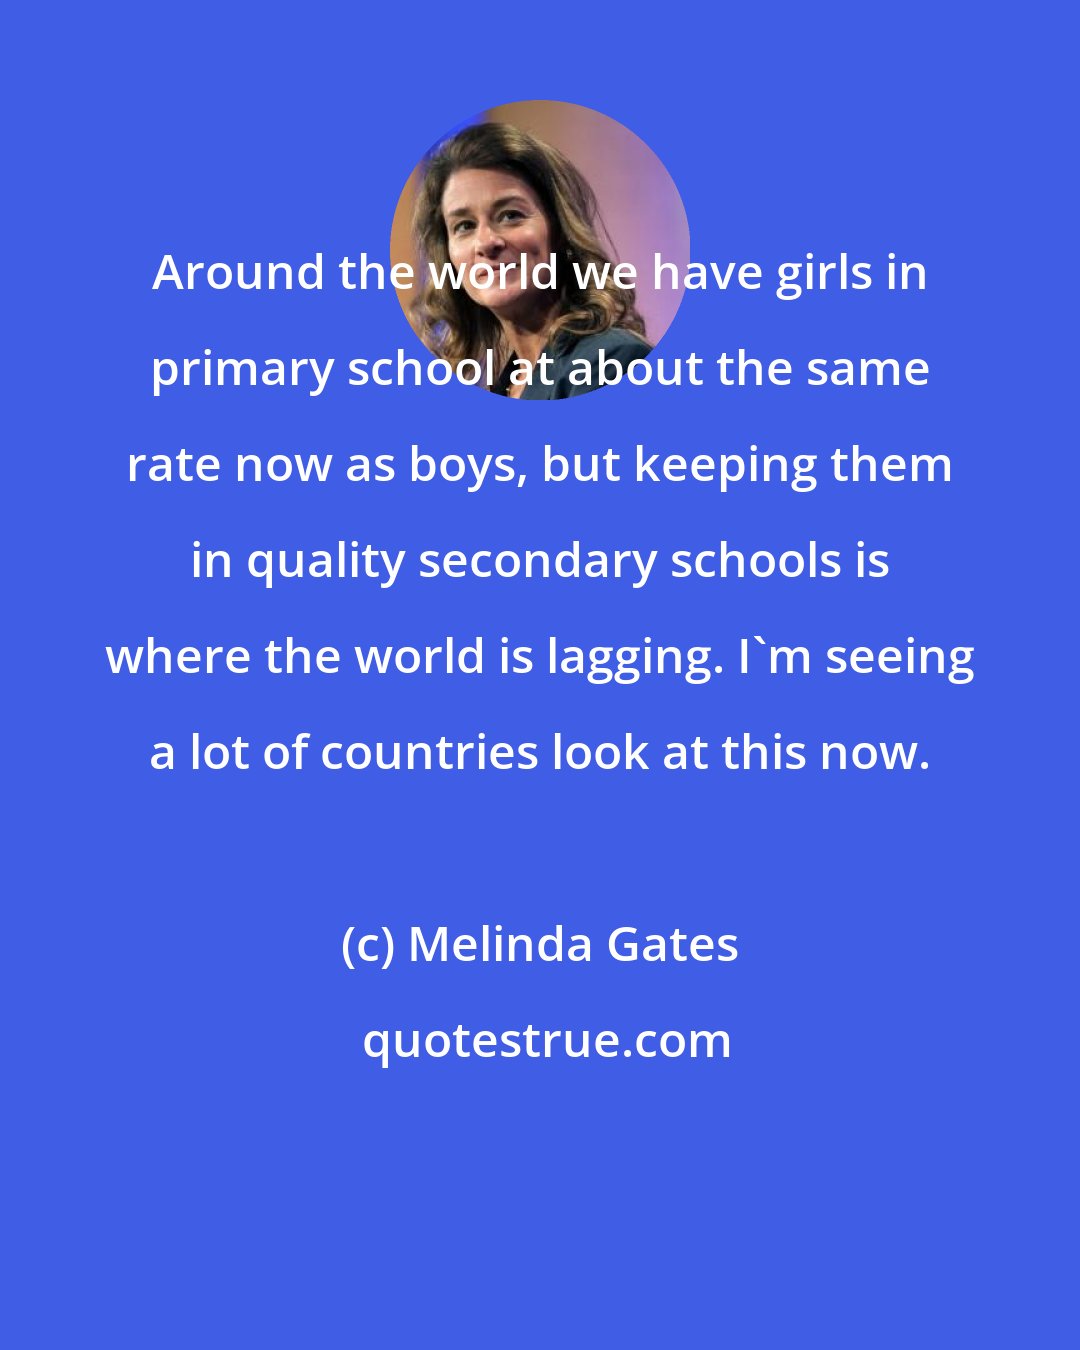 Melinda Gates: Around the world we have girls in primary school at about the same rate now as boys, but keeping them in quality secondary schools is where the world is lagging. I'm seeing a lot of countries look at this now.